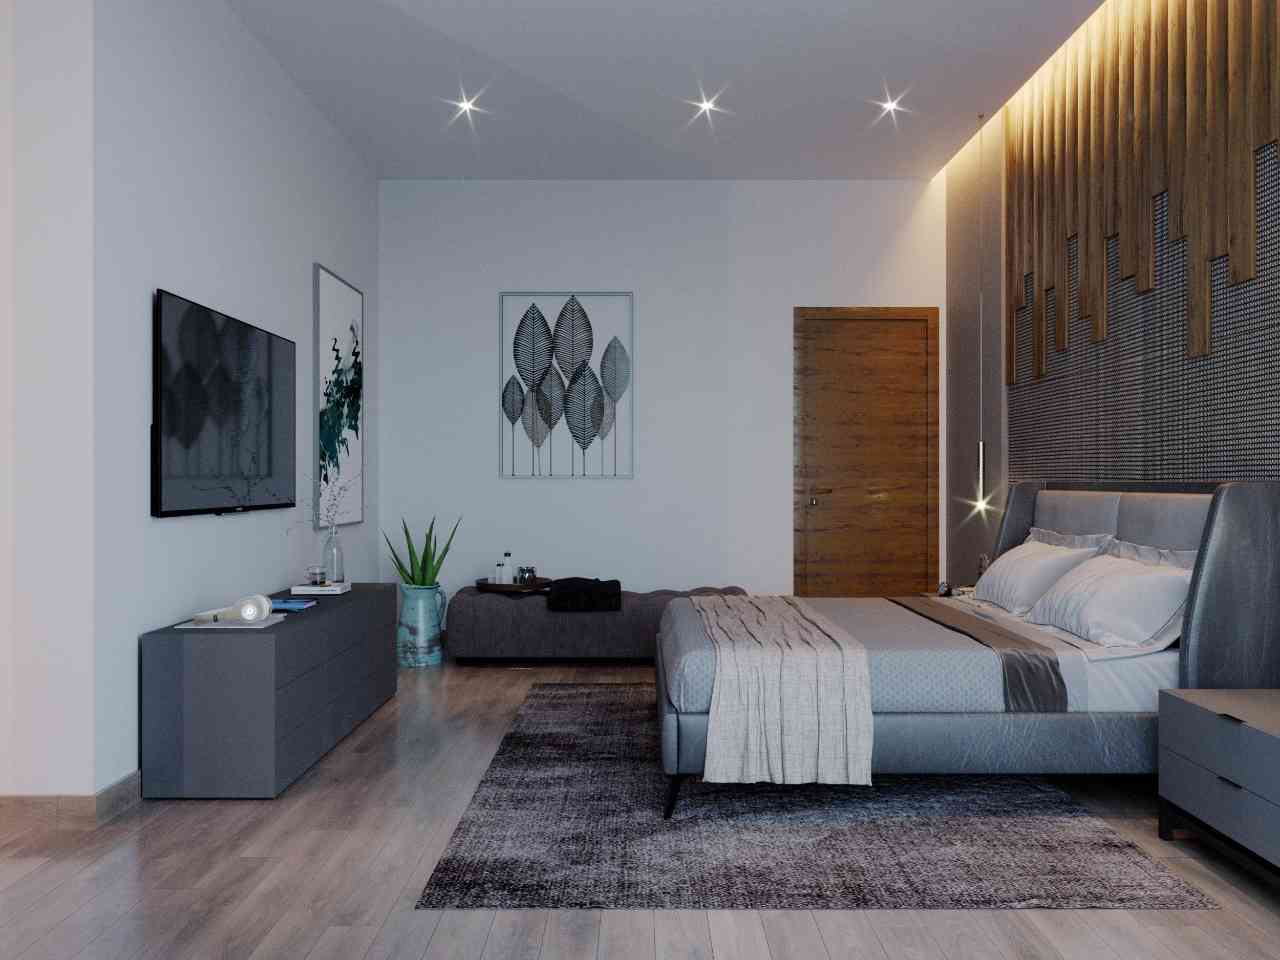 Modern Bedroom Design With Ice Blue Wall Paint And Graphic Wall Art